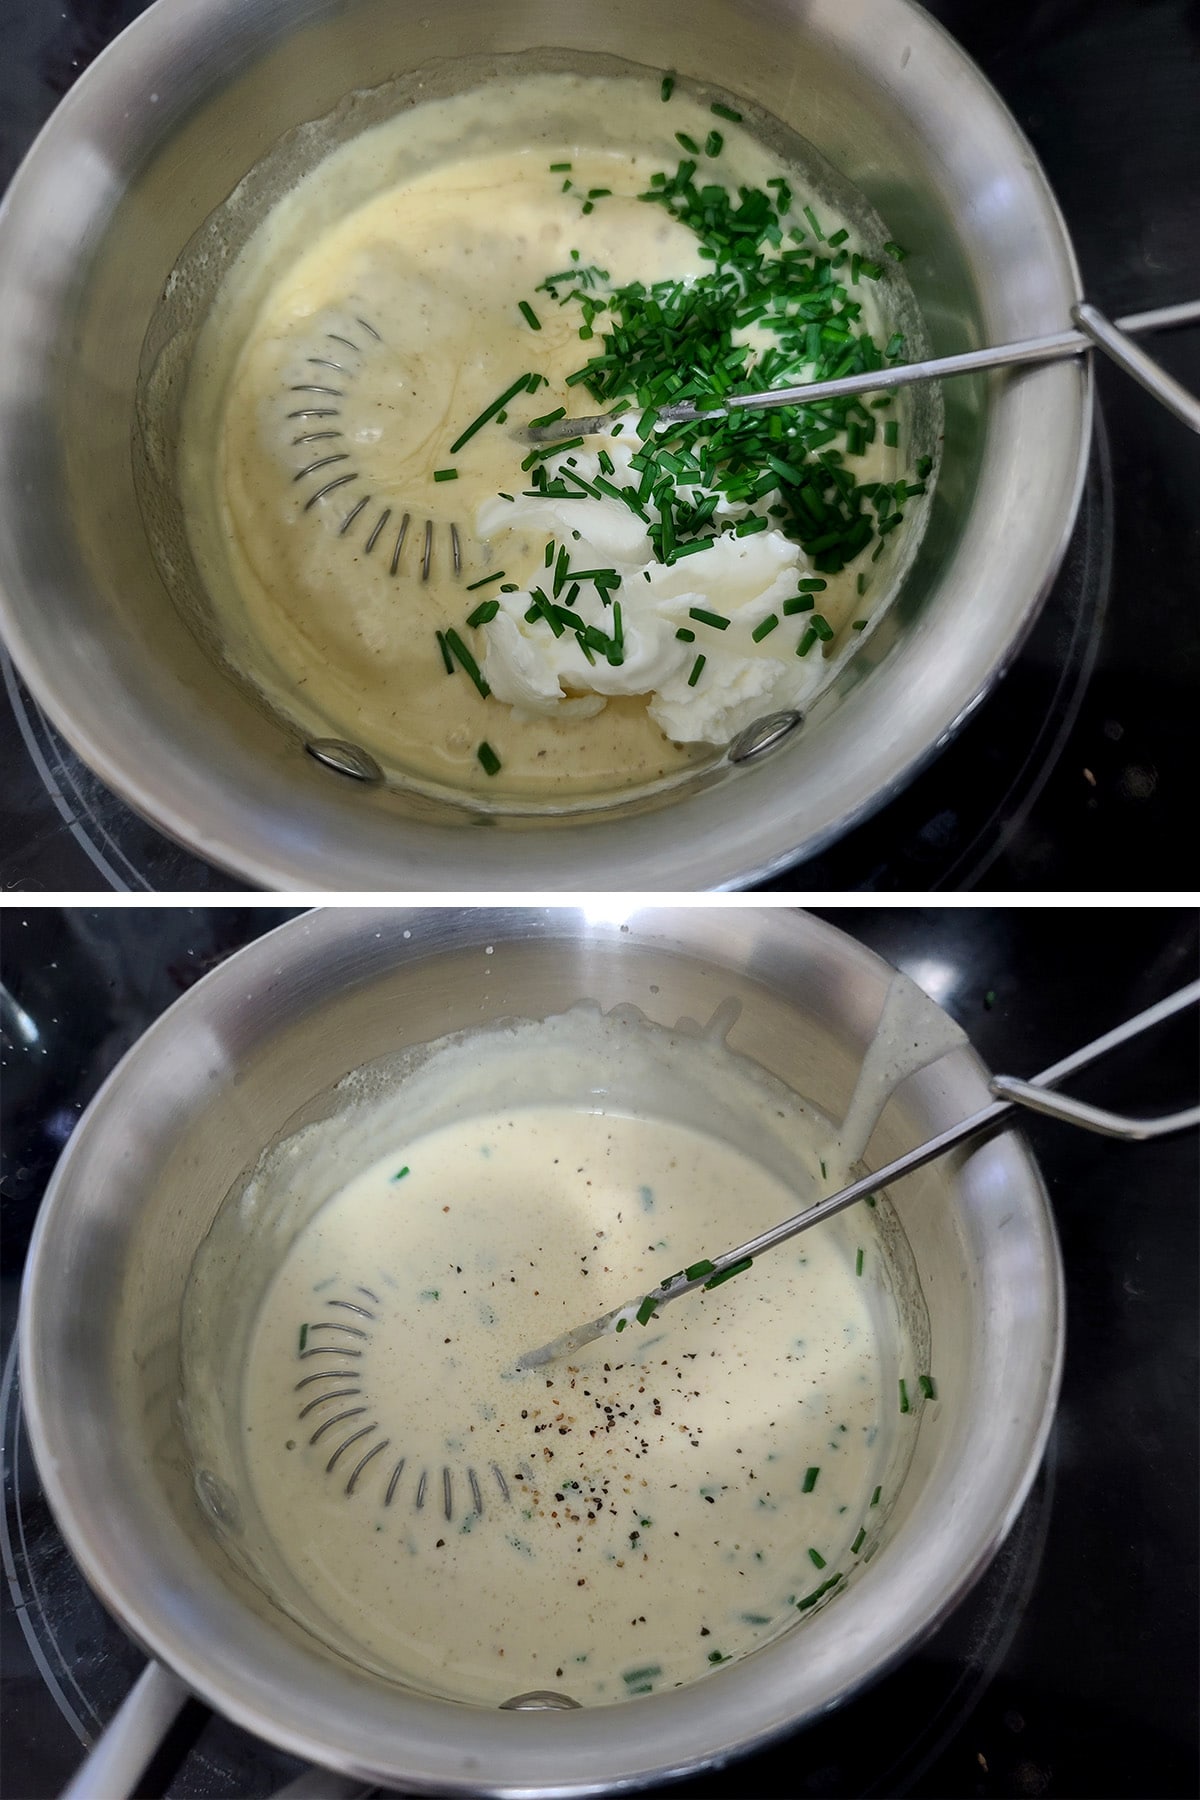 Sour cream and chives being added to the cream sauce and stirred in.